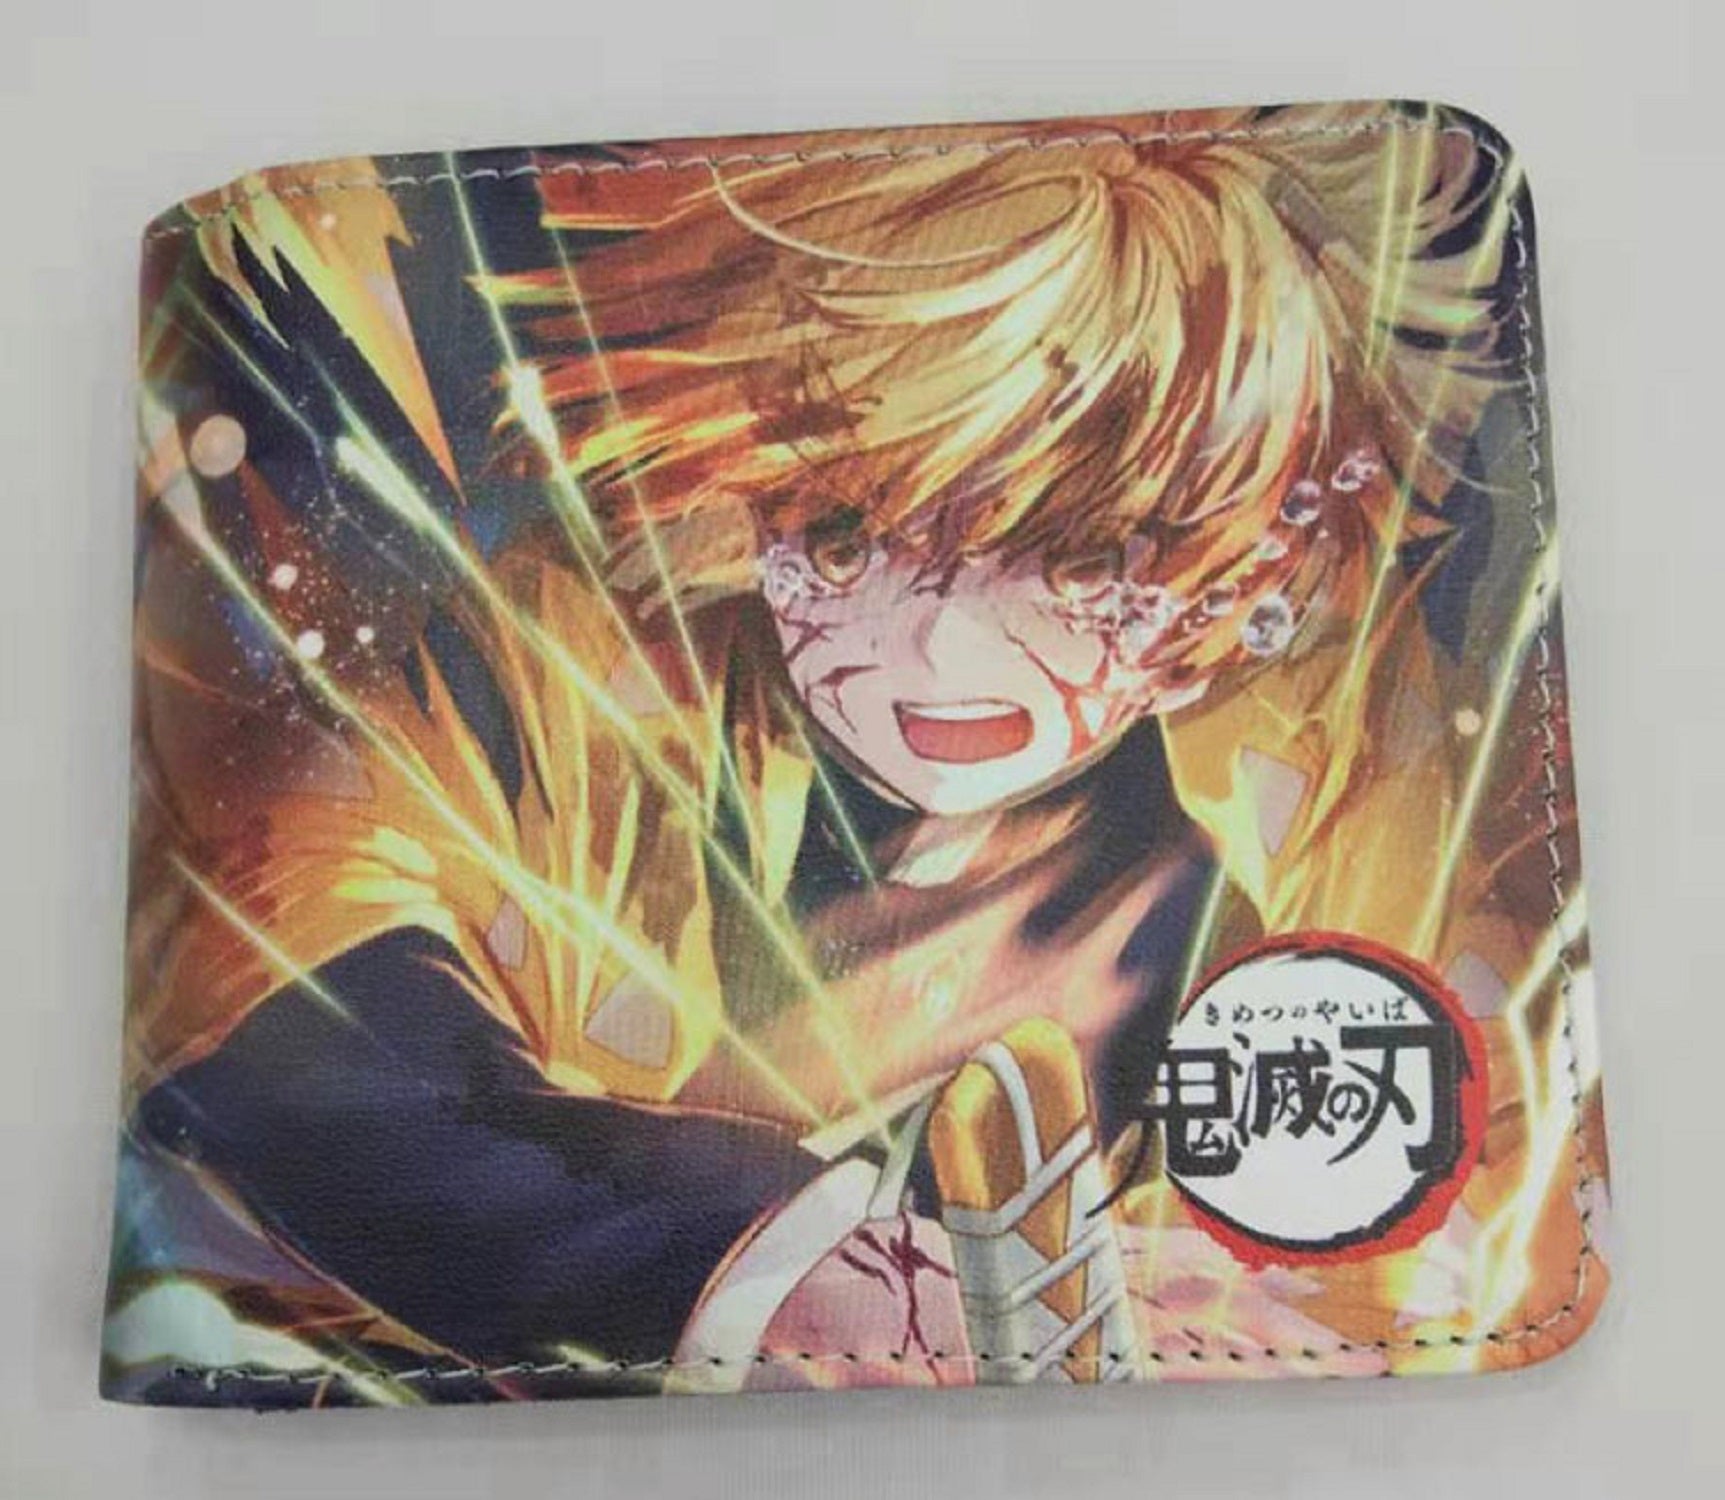 Demon Slayer Wallet - Super Anime Store FREE SHIPPING FAST SHIPPING USA